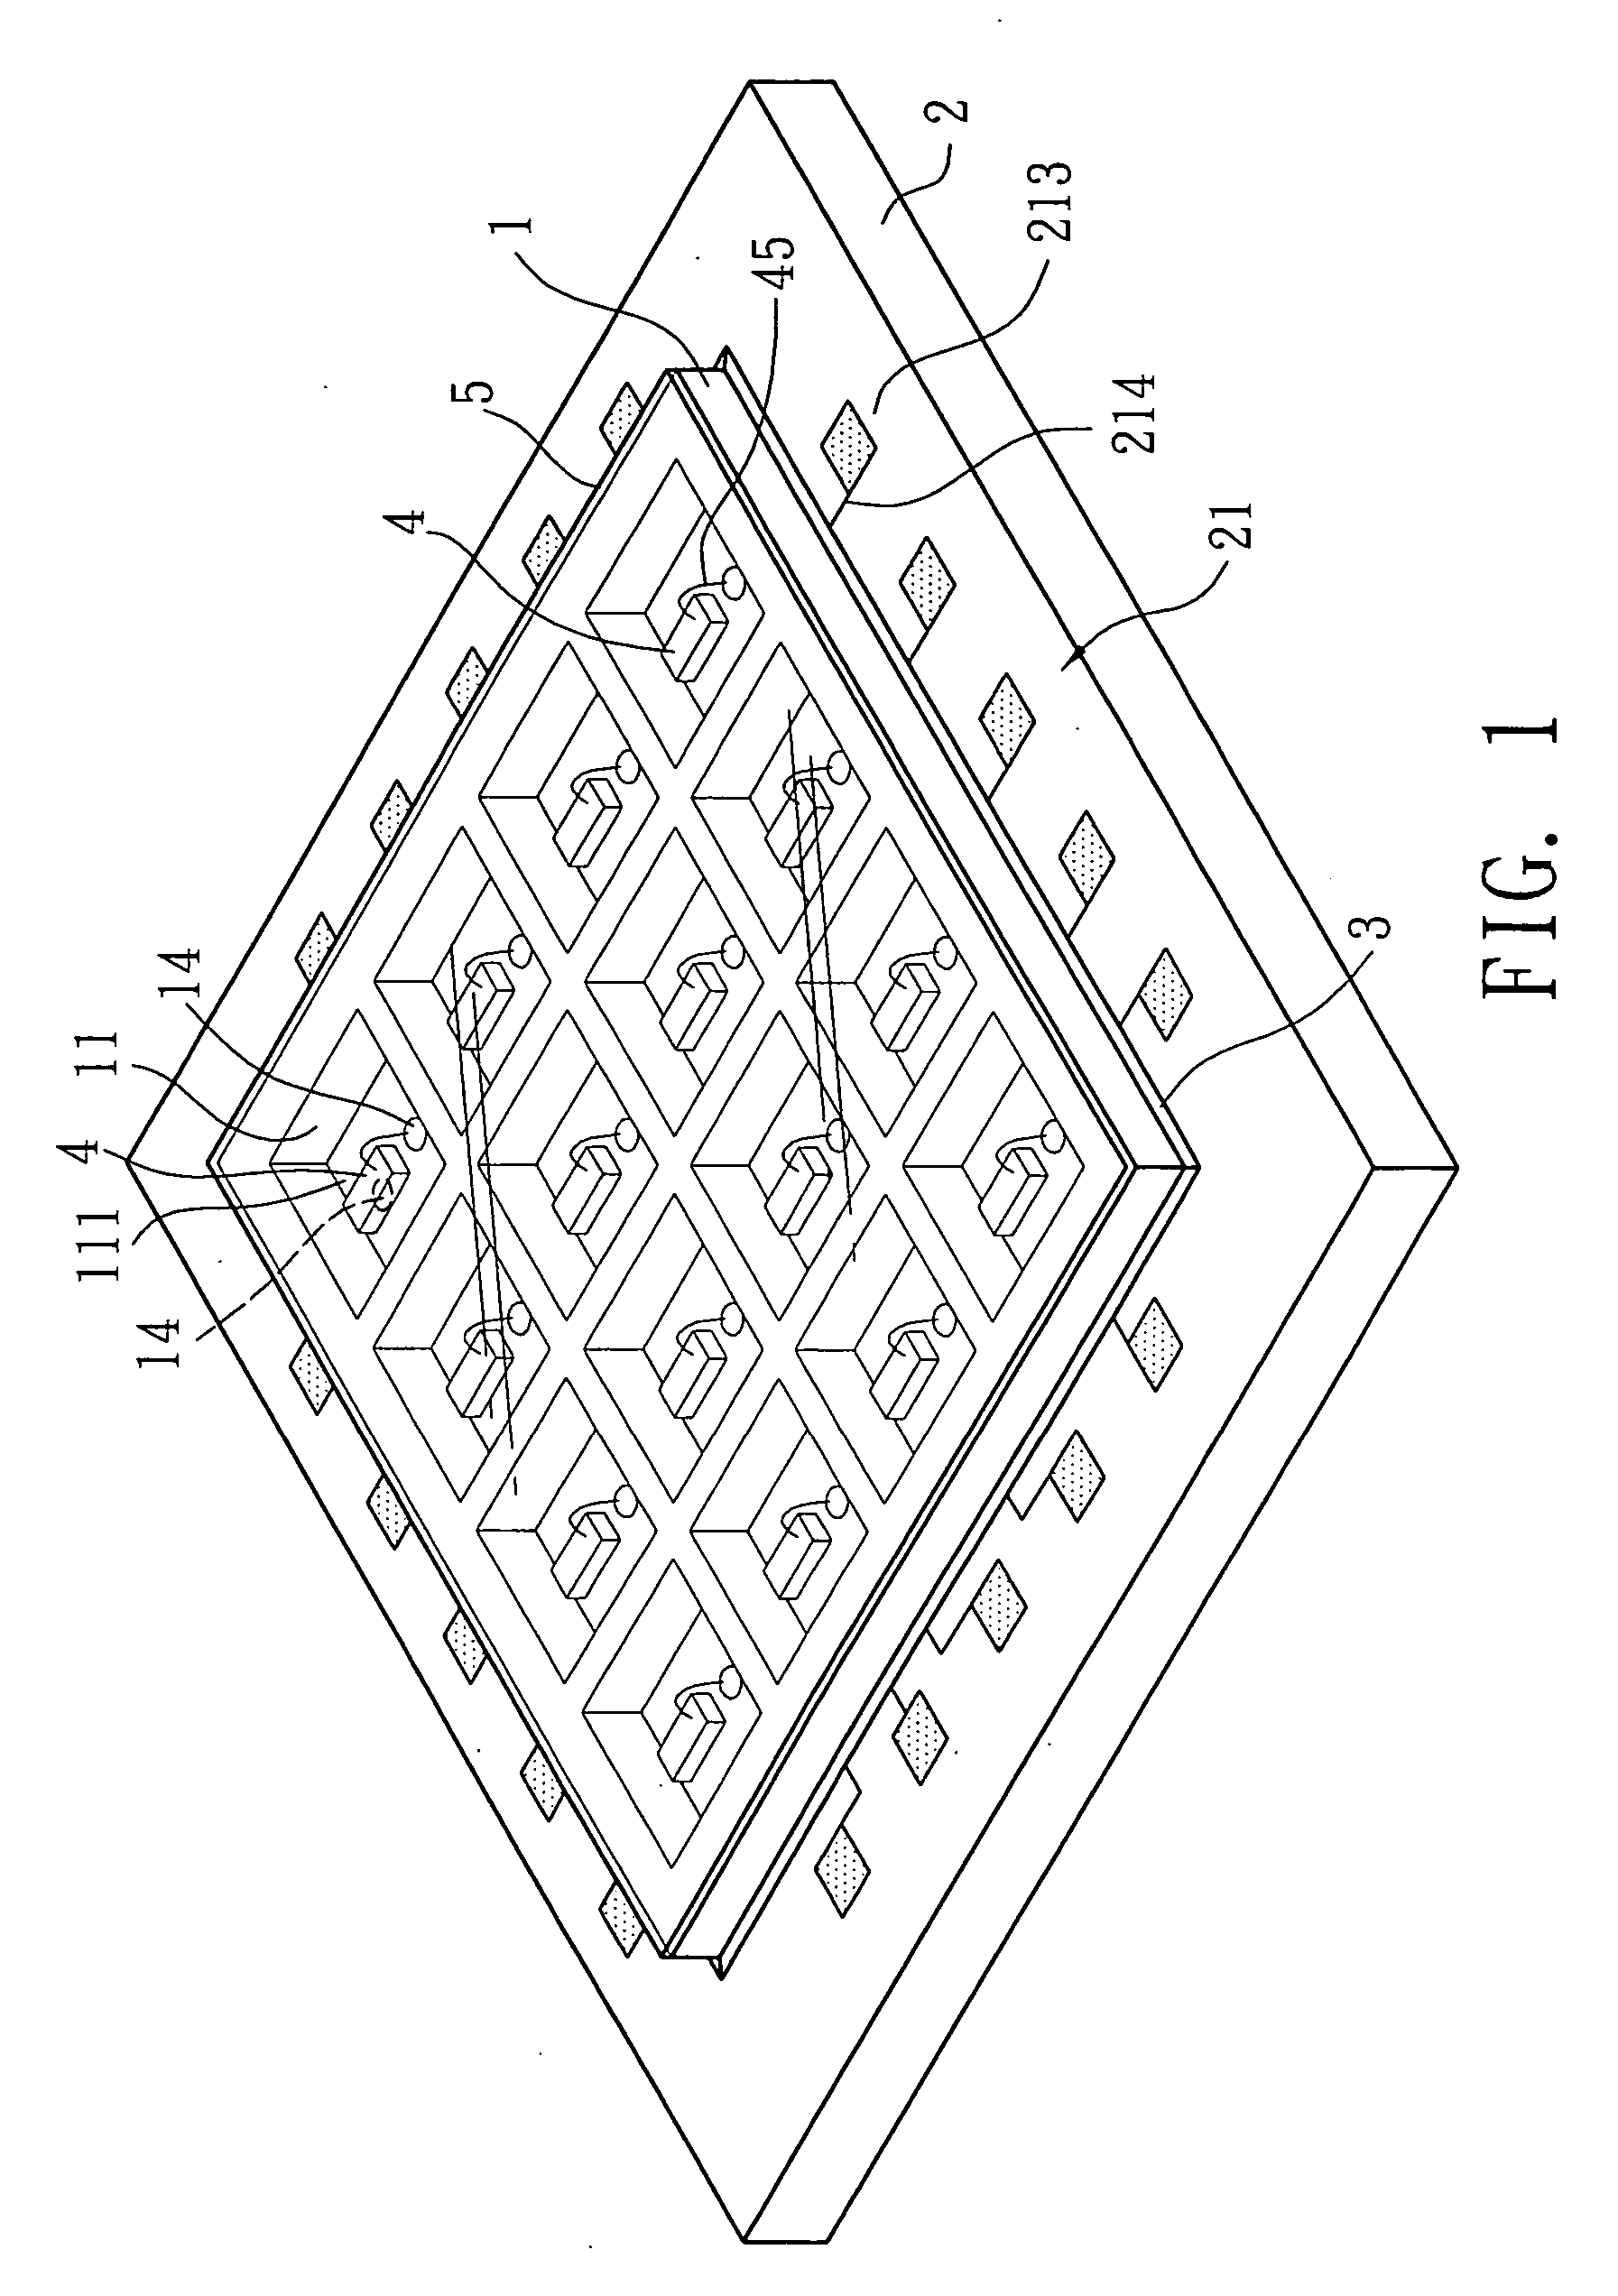 Array-type modularized light-emitting diode structure and a method for packaging the structure